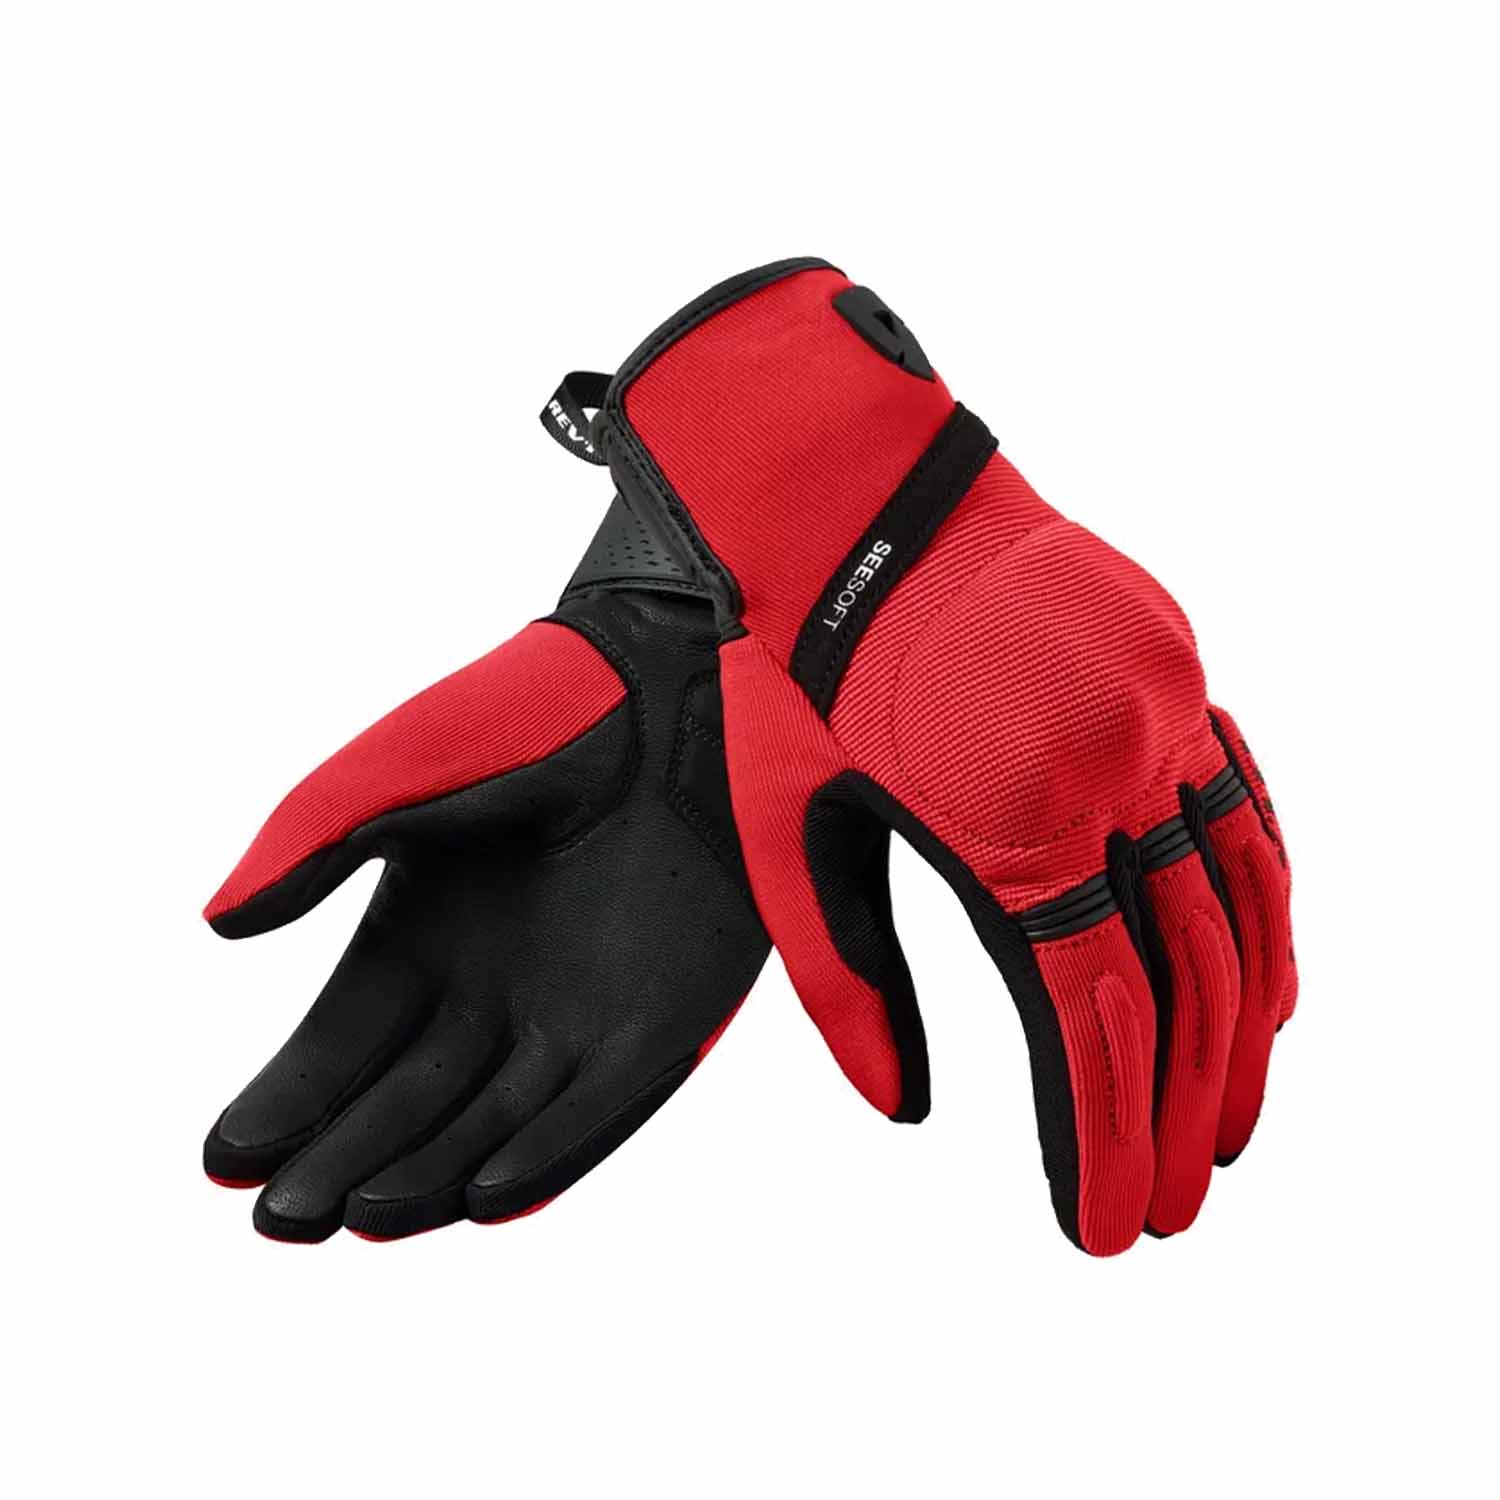 Image of REV'IT! Mosca 2 Ladies Gloves Red Black Talla XL